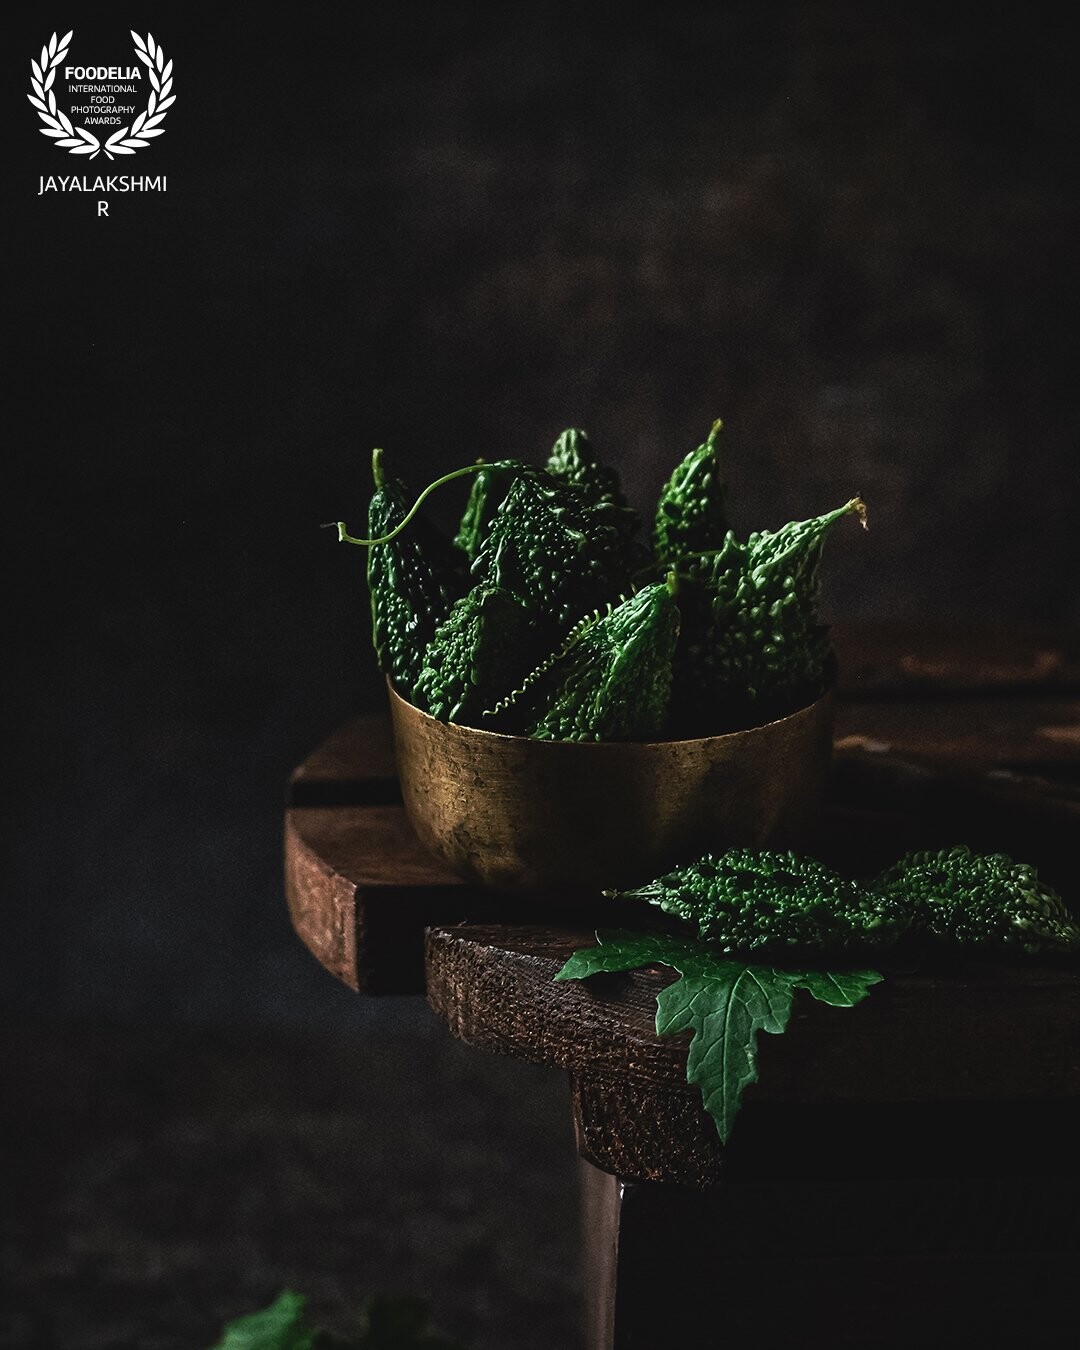 Fresh homegrown bitter gourd shot in a rustic moody frame. Used minimal props to highlight the green shades. The wooden stool adds the rustic tone to the frame.shot in natural light.